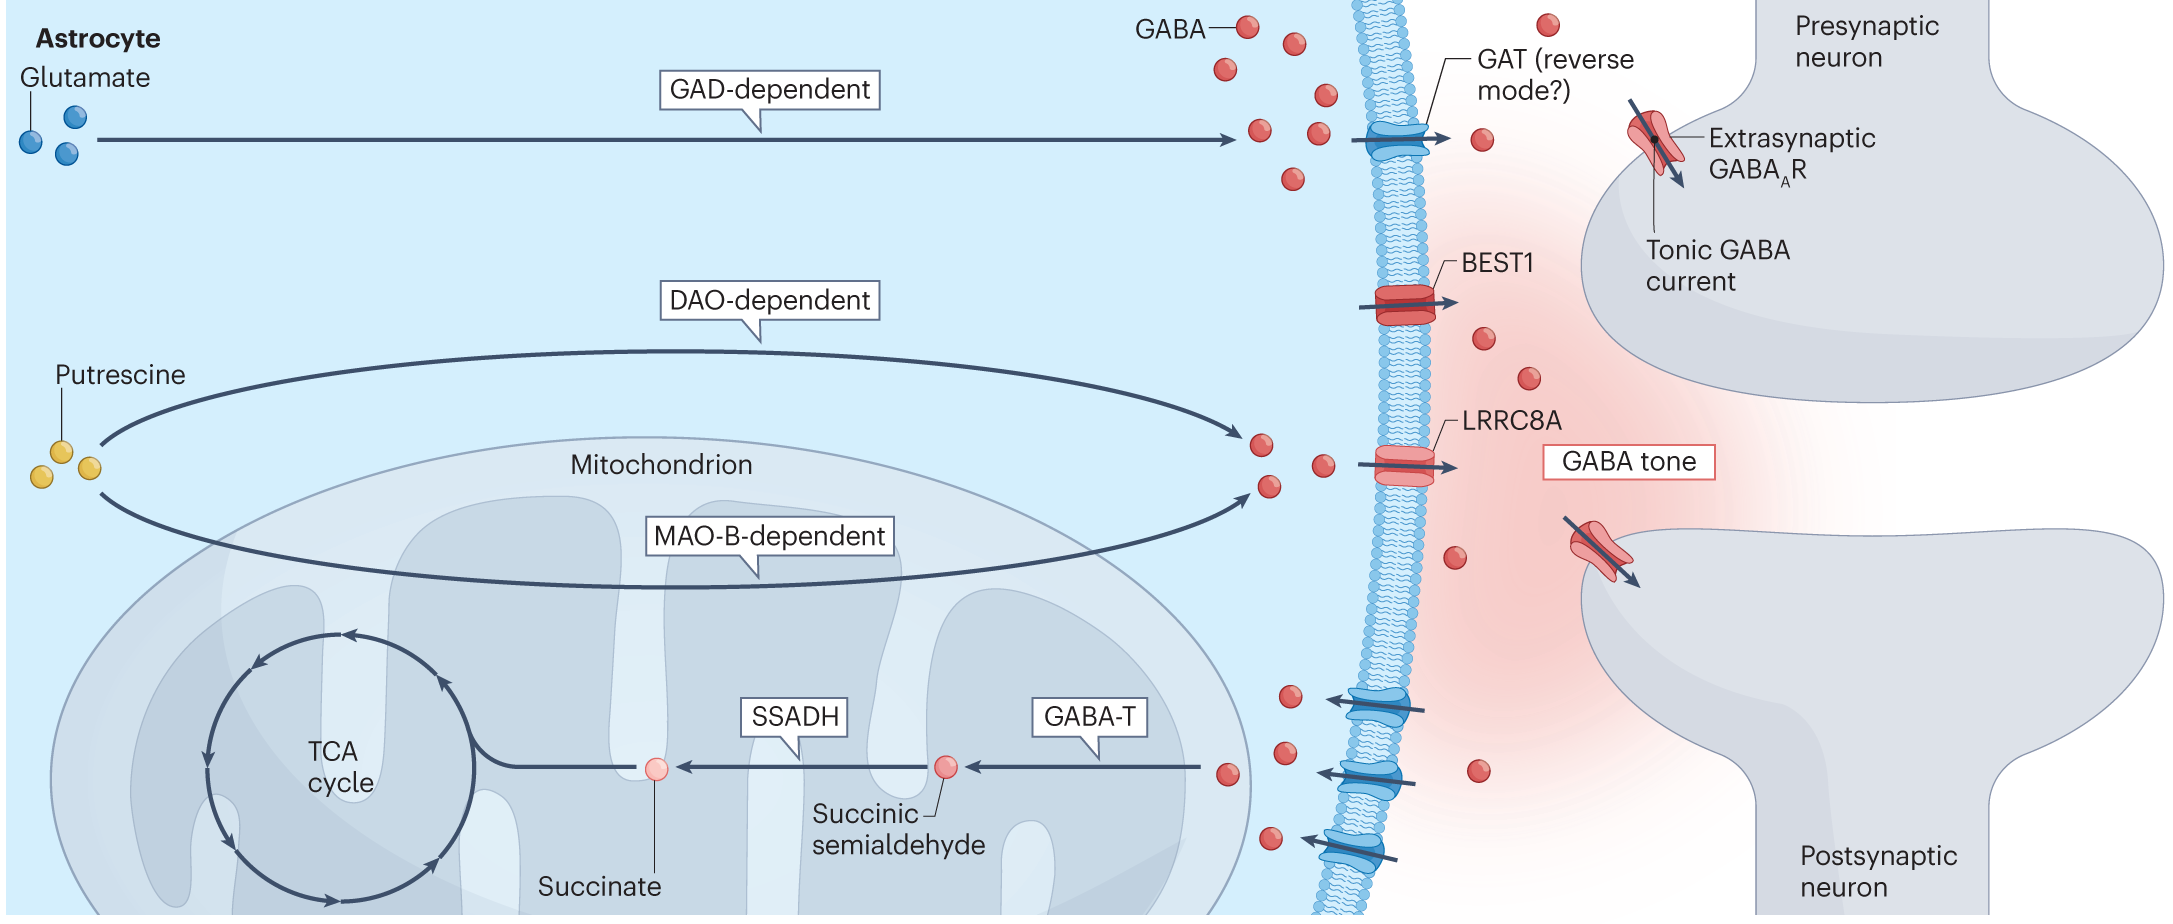 Figure 1. Once thought to be merely supporting cells in the brain, astrocytes now seem to be the most appropriate cells to regulate γ-aminobutyric acid (GABA) tone. Astrocytes have a positional advantage over other cell types because, as part of the tripartite synapse, they are located close to the extrasynaptic sites that largely regulate the induction of tonic GABA current in neurons. Moreover, astrocytes are distinct from other brain cells because they have at least one mechanism for synthesizing, releasing, and clearing GABA, and molecular studies have demonstrated that they, rather than neurons, regulate GABA tone in different brain regions. For example, cerebellar astrocytes use monoamine oxidase B (MAO-B) to synthesize GABA, and thalamic astrocytes use diamine oxidase (DAO) to synthesize GABA. Cerebellar, thalamic, hippocampal, and dorsal root ganglia astrocytes release GABA through BEST1, and ventral tegmental area (VTA) astrocytes release GABA through LRRC8A. That astrocytes have all three GABA regulatory mechanisms underscores their enormous role in regulating GABA tone. In other words, it suggests that changes in astrocytes (such as increased GABA synthesis, increased GABA release, or decreased GABA clearance) can directly lead to changes in GABA tone and modulate cognitive function. GABA-T, GABA transaminase; GAD, glutamate decarboxylase; GAT, GABA transporter; SSADH, succinic semialdehyde dehydrogenase; TCA, tricarboxylic acid.